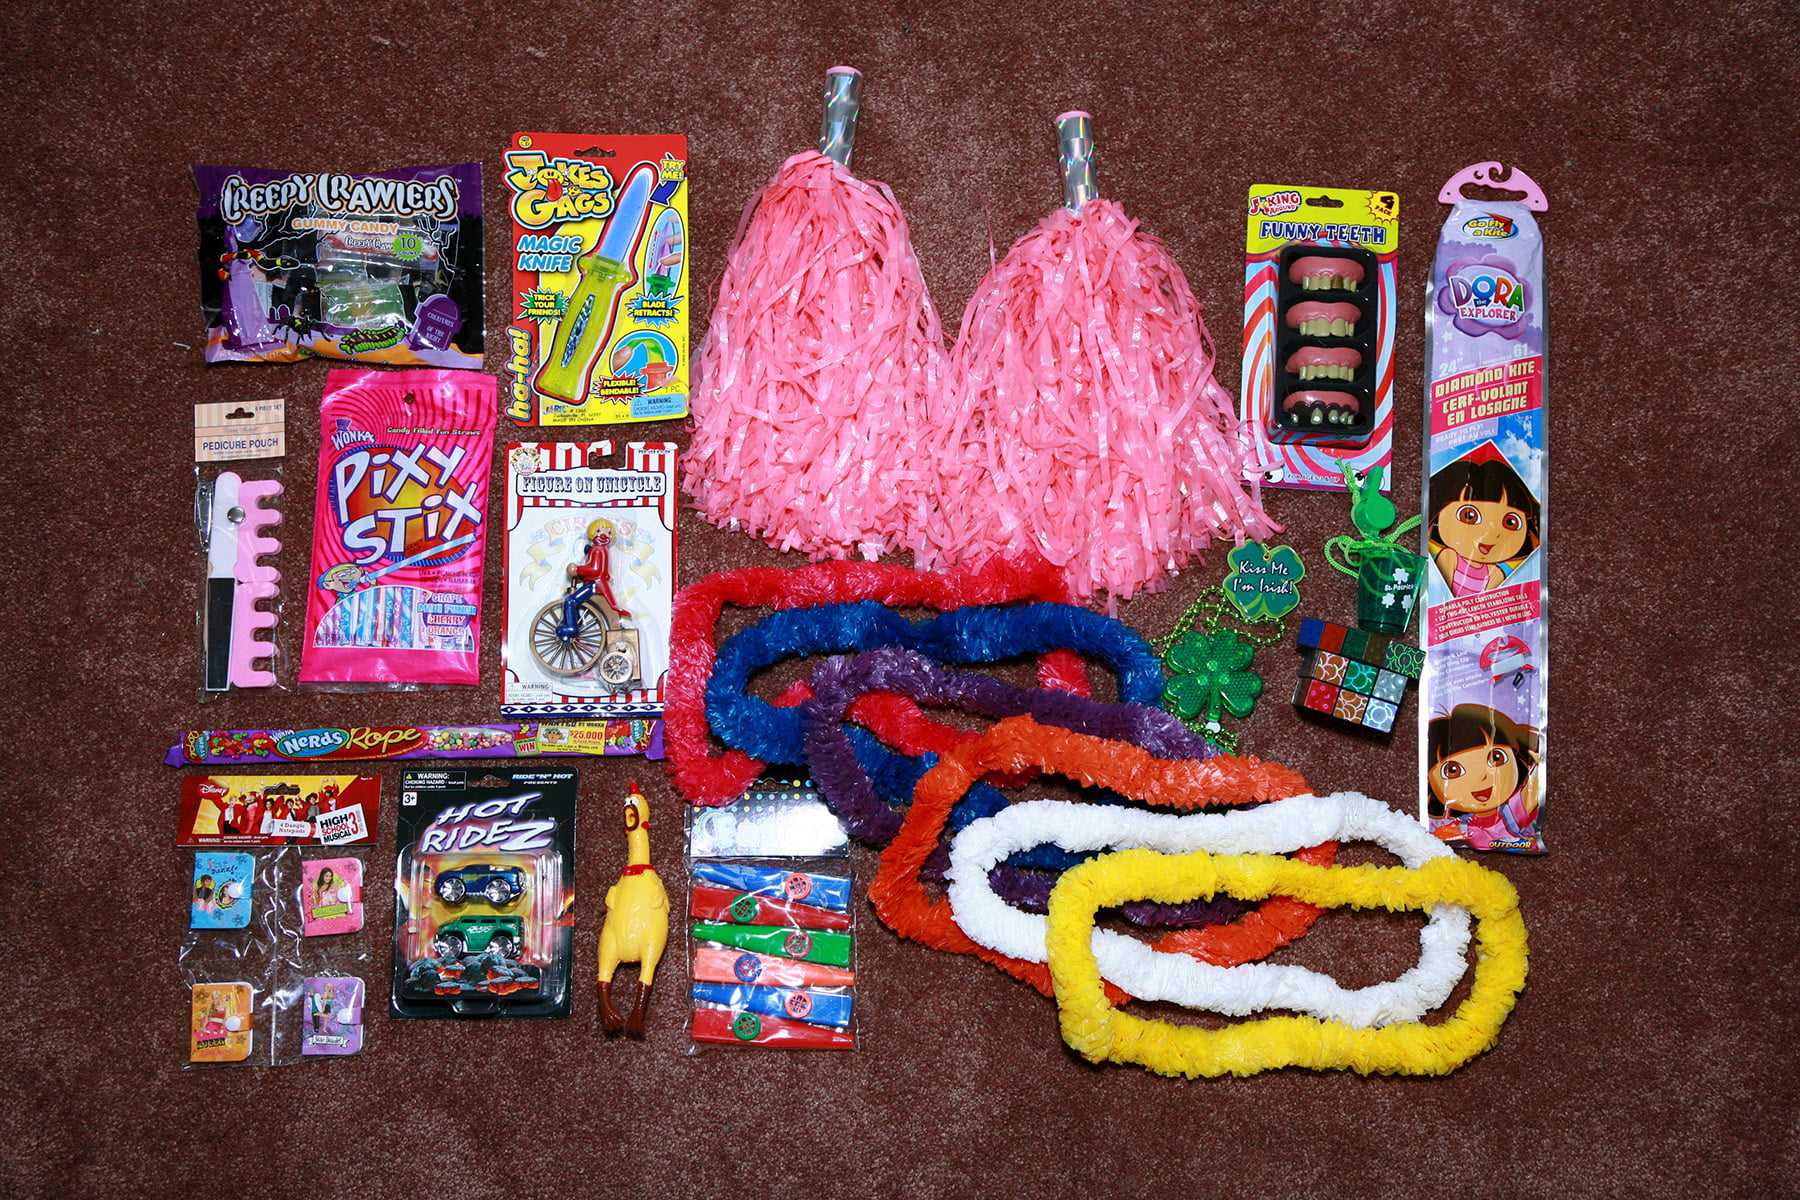 An assortment of candies and random toys - pinata stuffing - is shown spread out on a brown carpet.